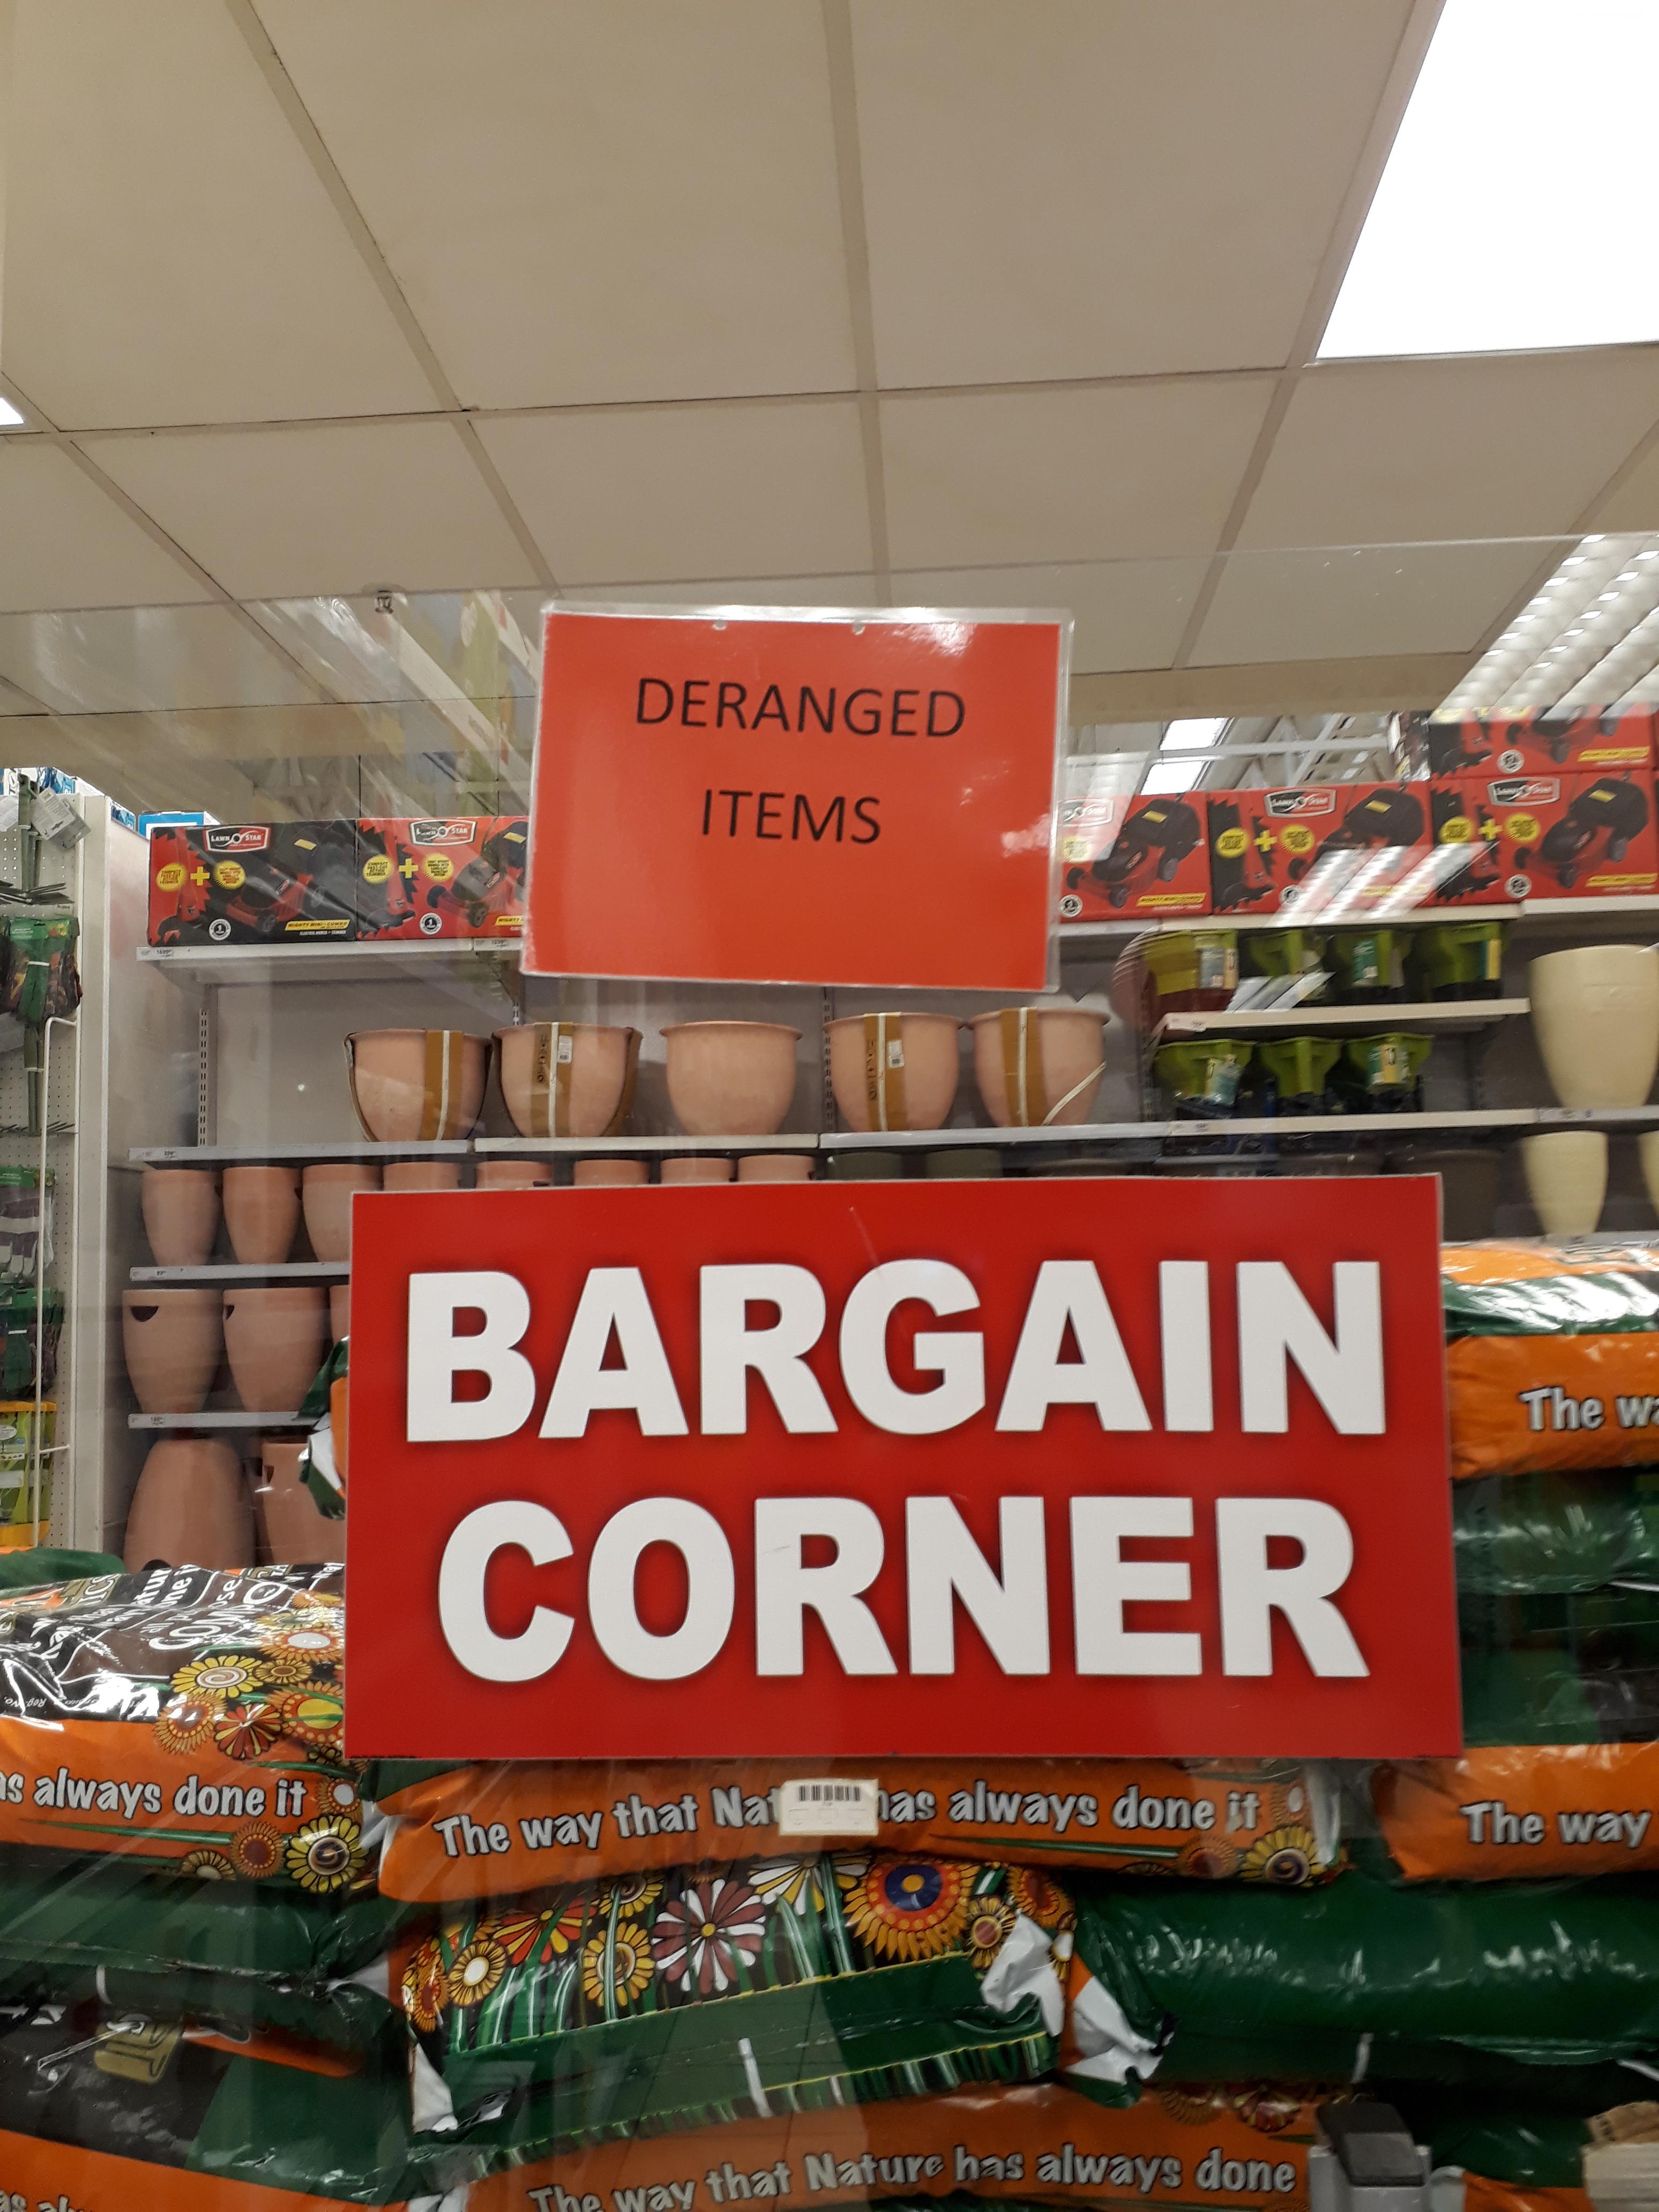 supermarket - Deranged Items The Bargain Corner always done it The way that Na as always done to The way The way thal Na always done